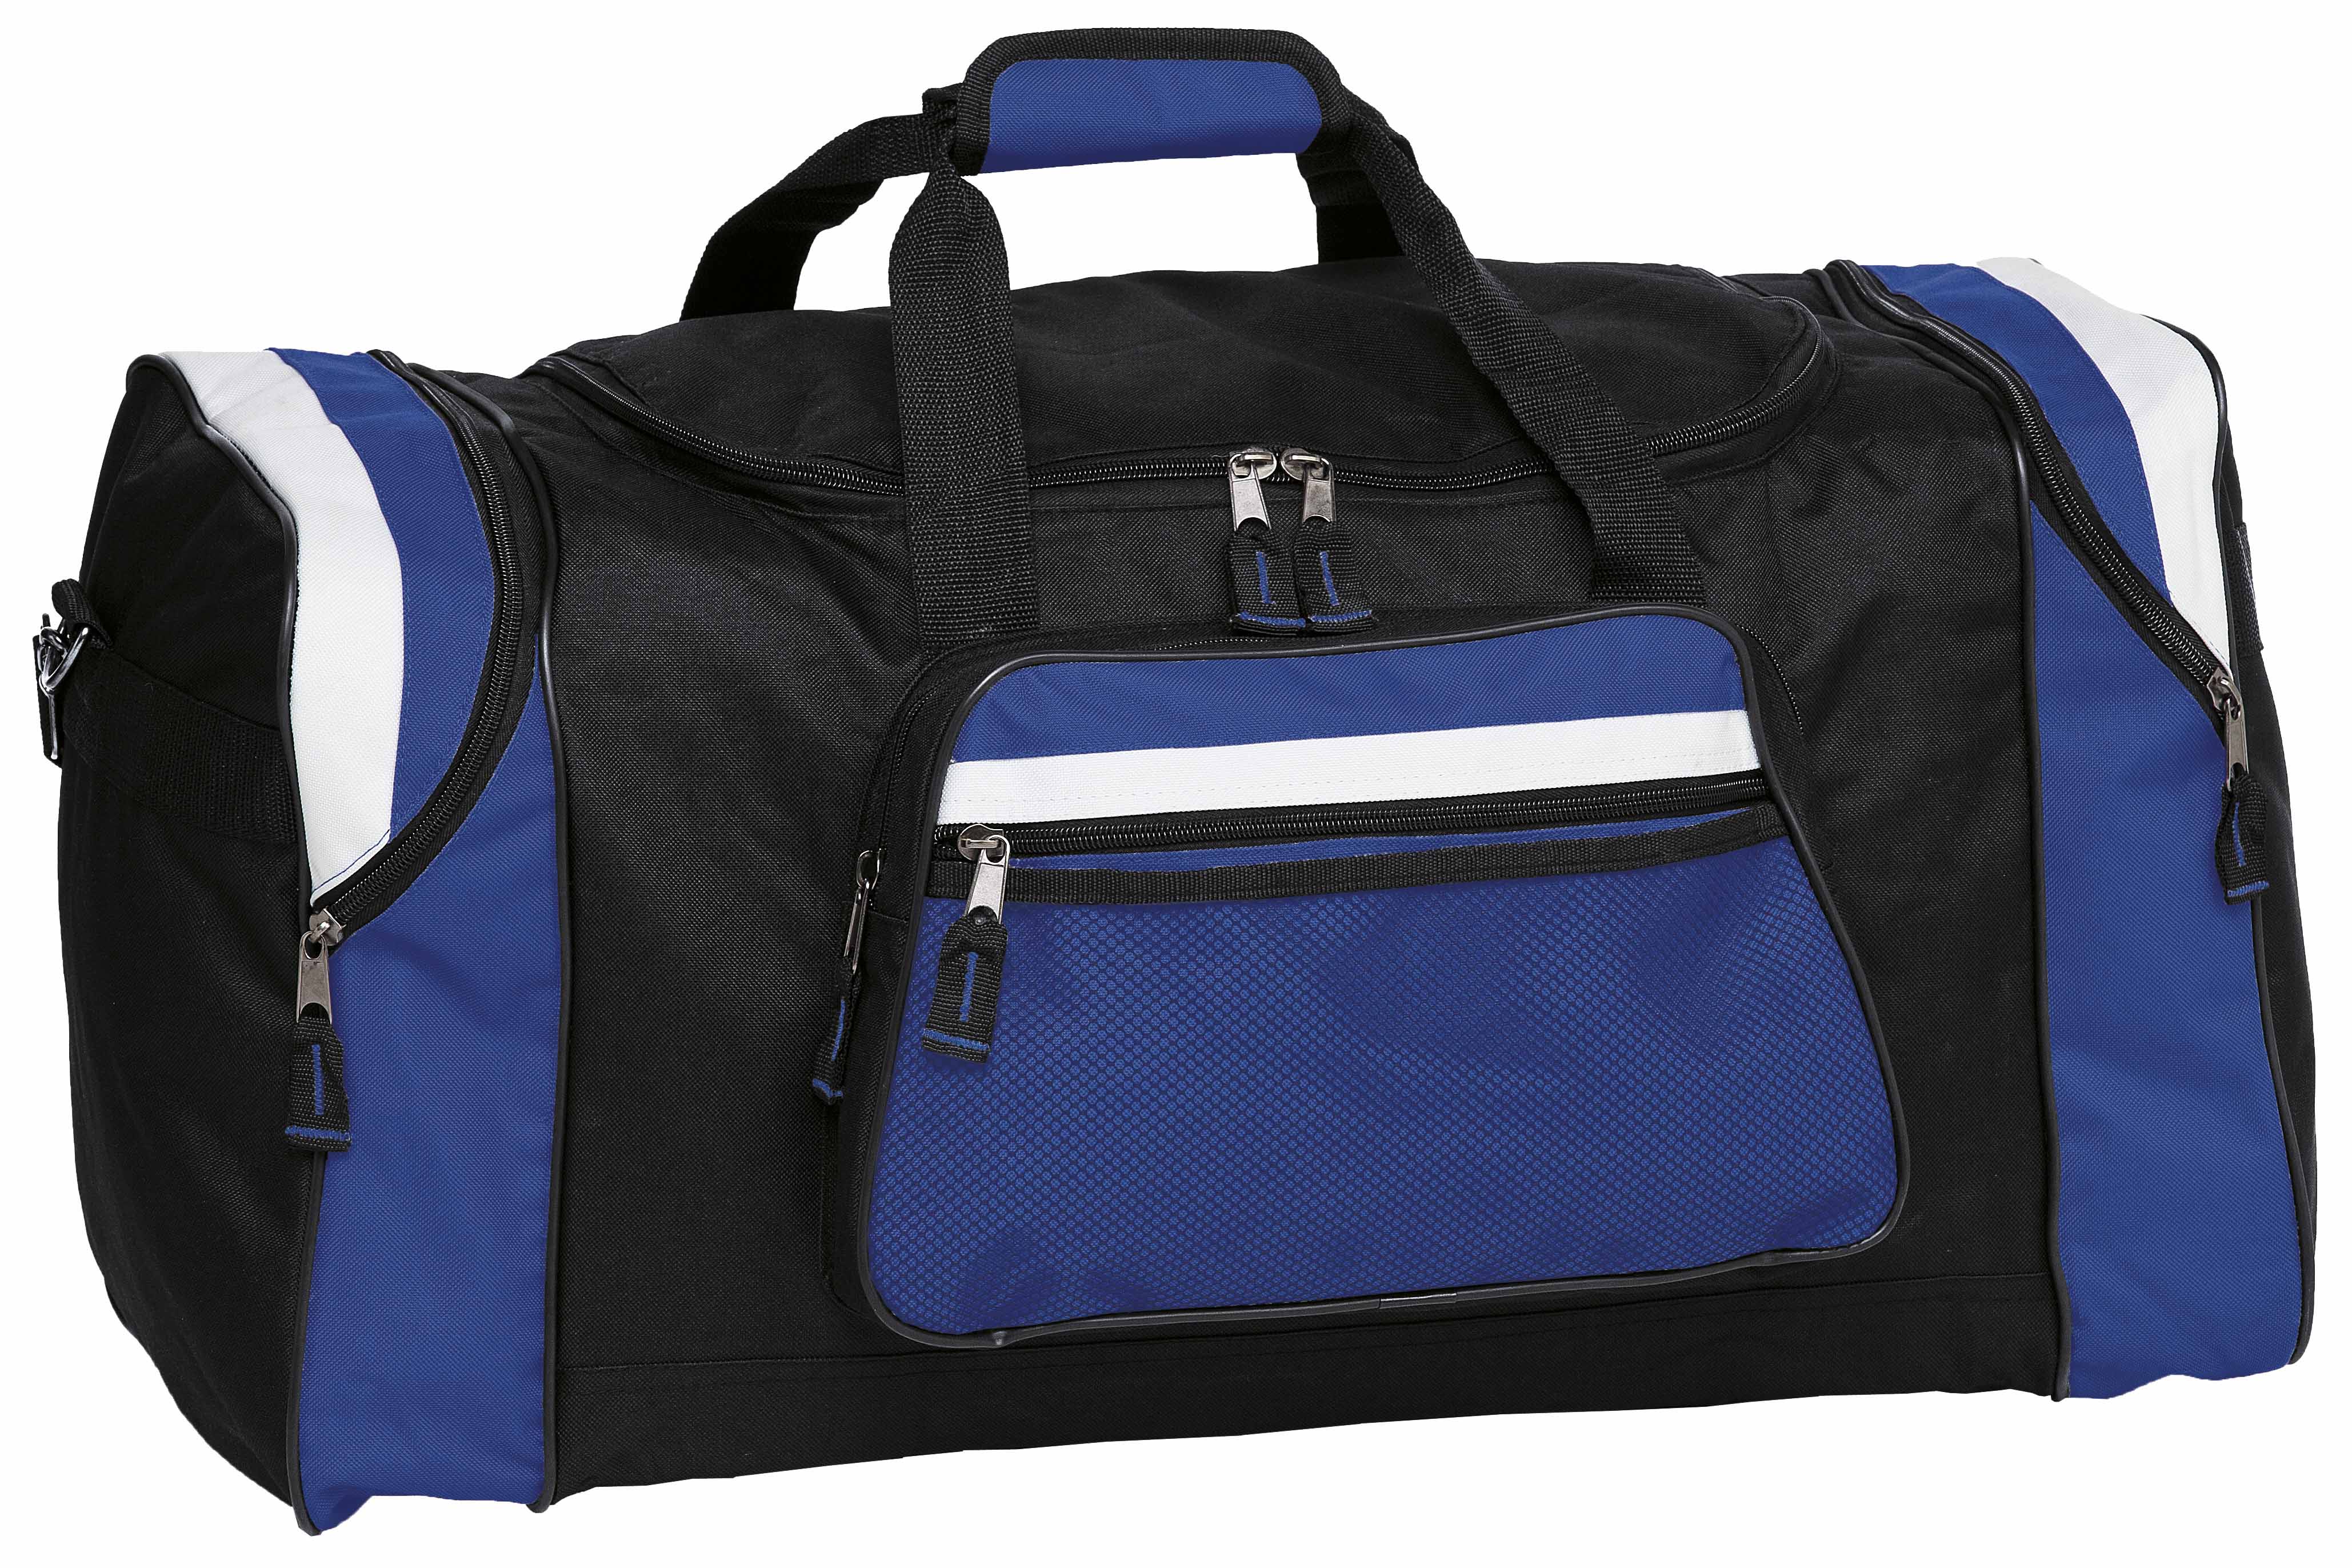 Contrast Gear Sports Bag - Image Group